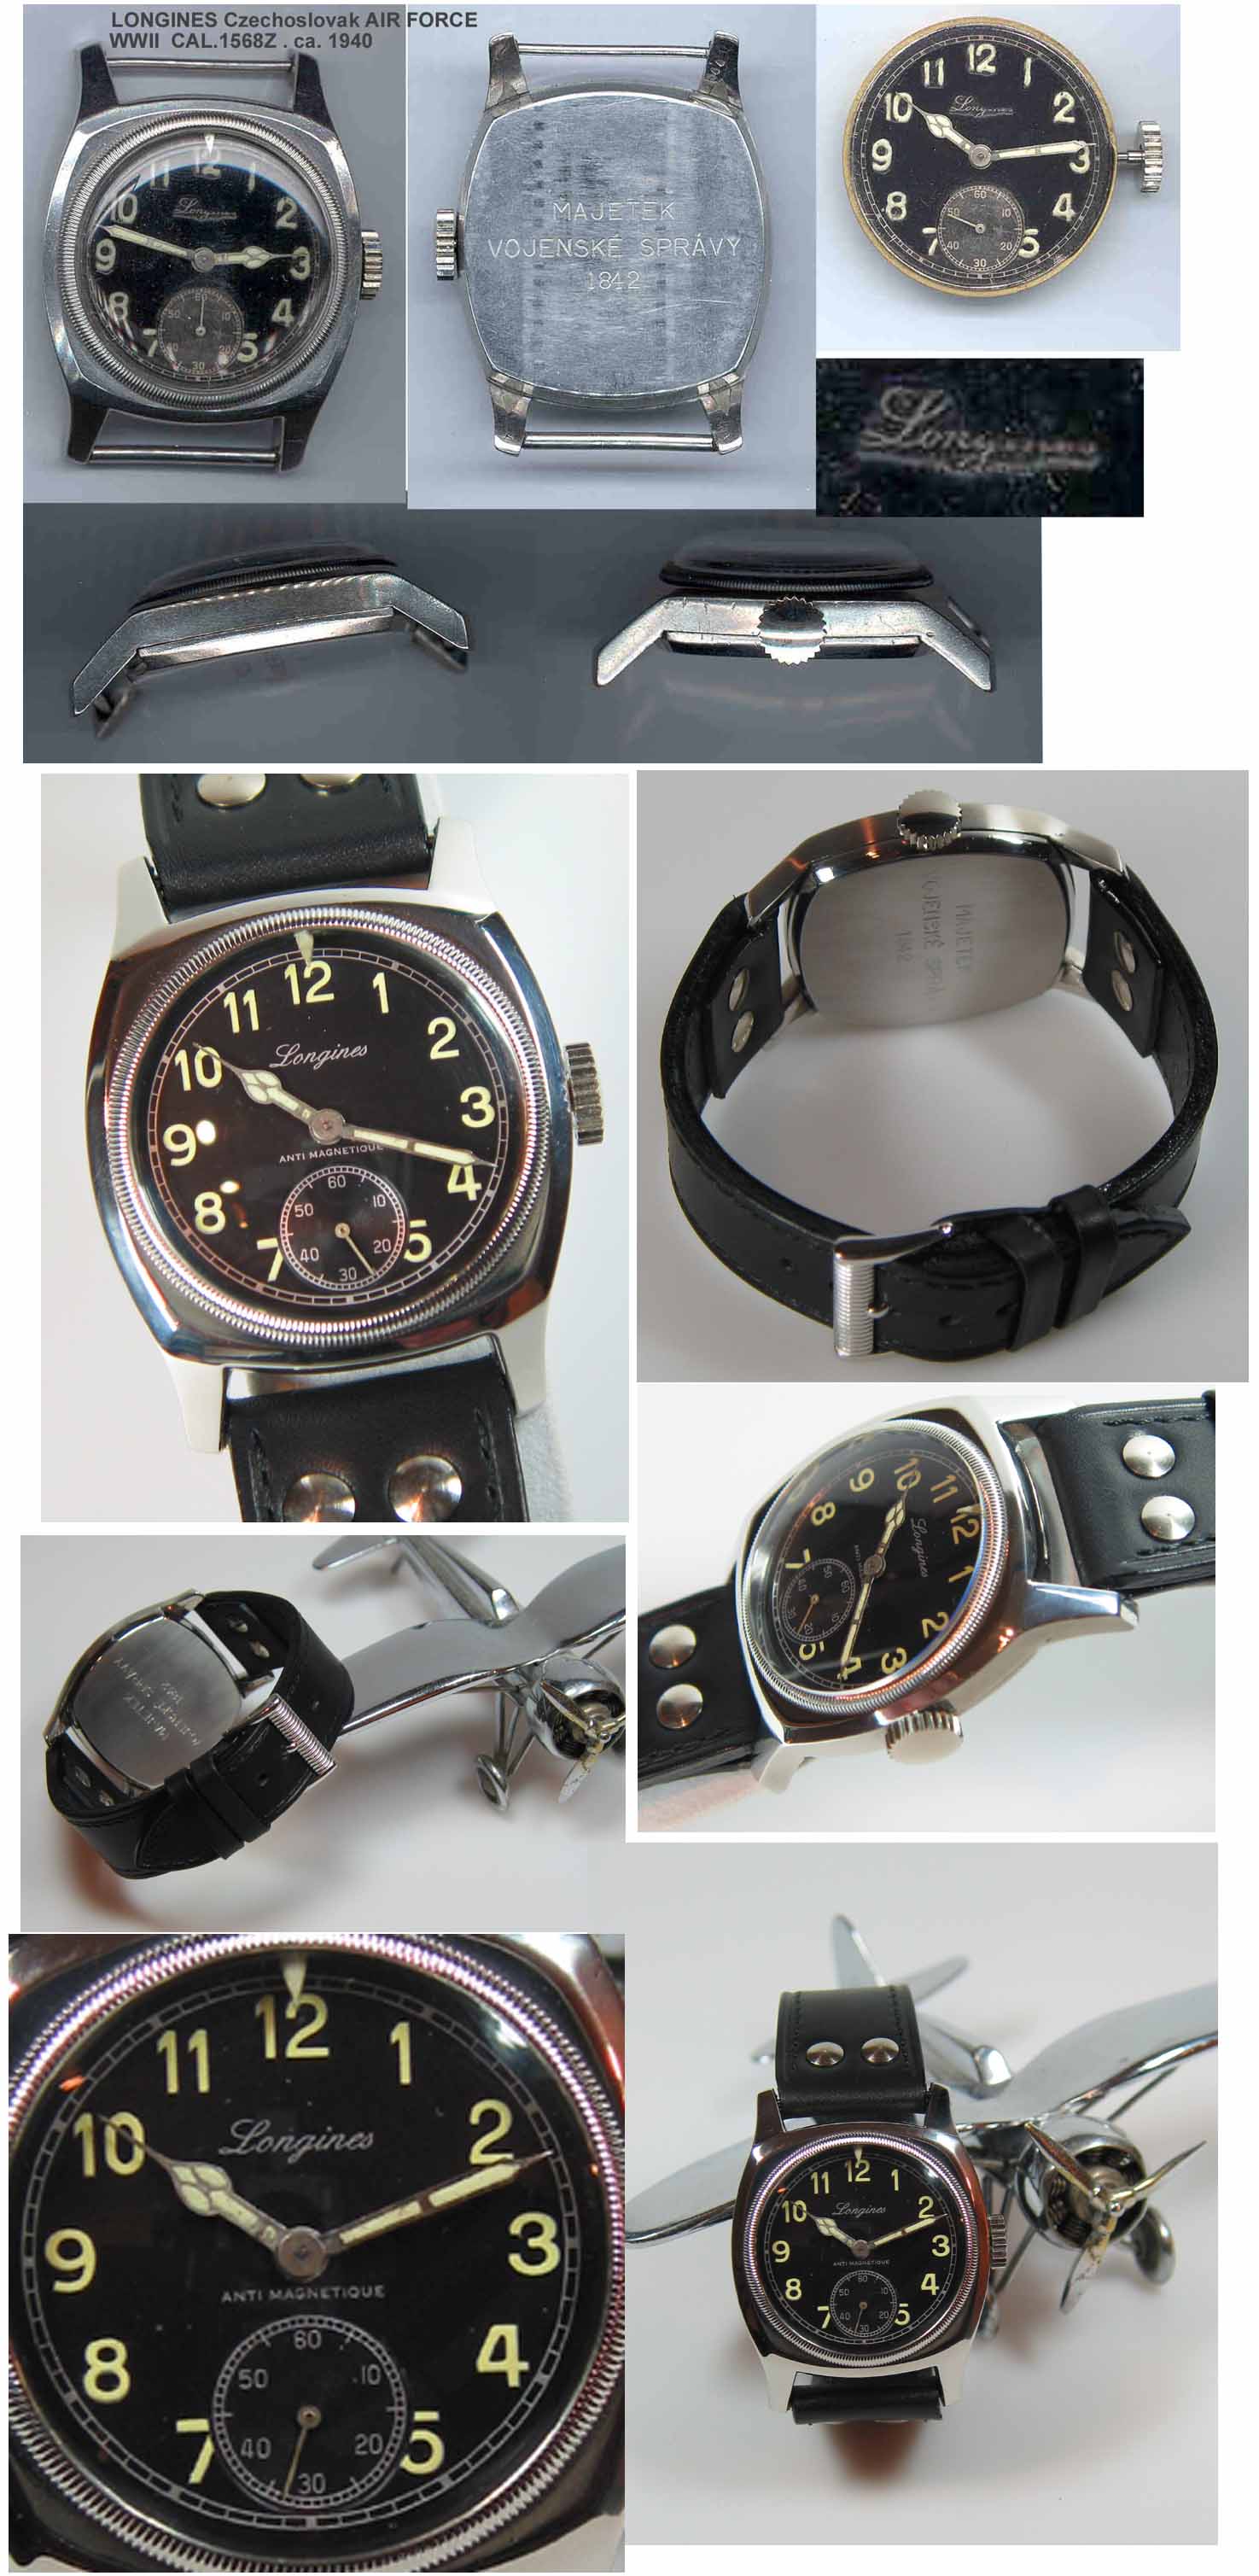 LONGINES_CZECHOSLOVAK_AIRFORCE_REVIEW_BEFORE_AFTER_NO_1.jpg